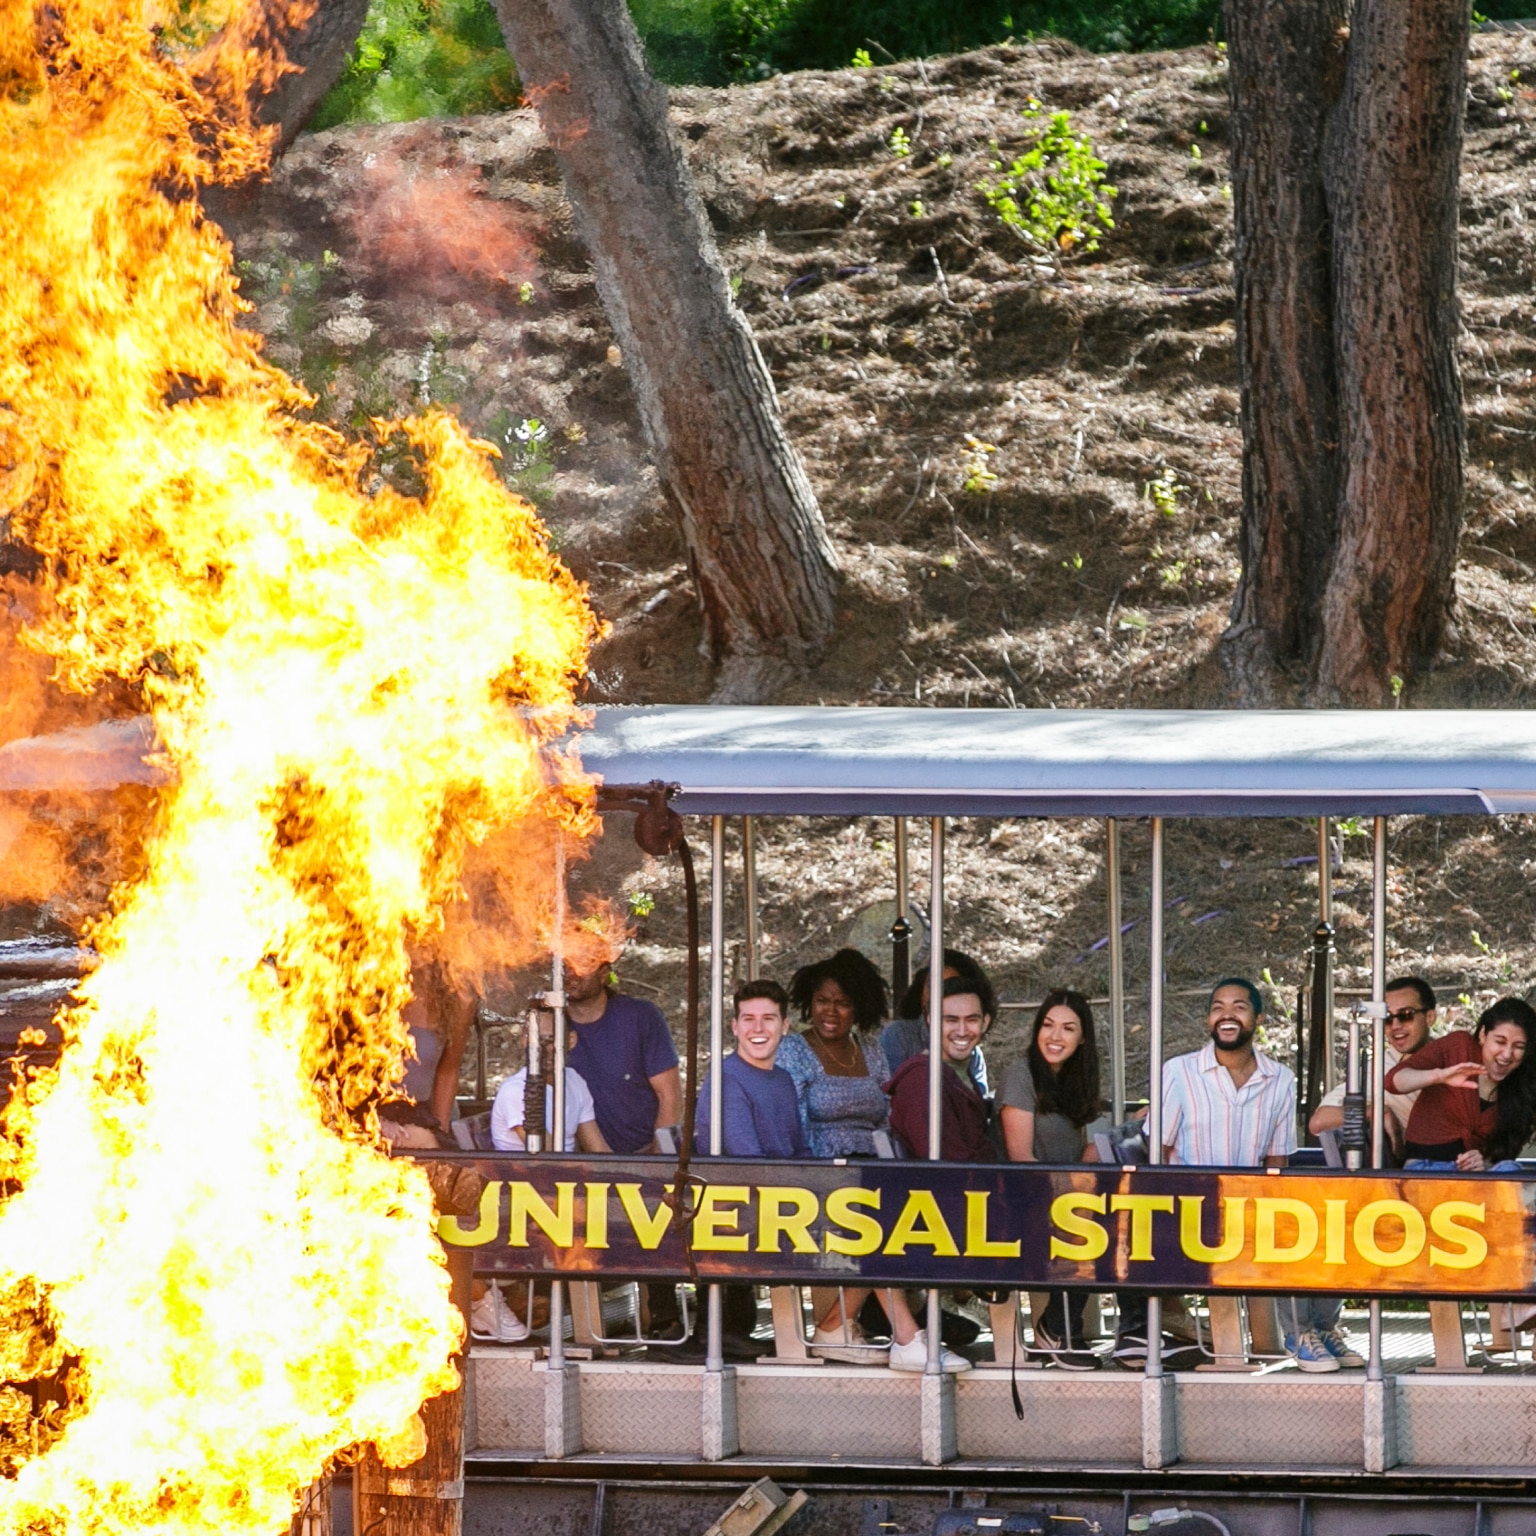 Guests aboard a tram on the Universal Studios Hollywood Studio Tour gaze at a blazing fire from the “Jaws” set.